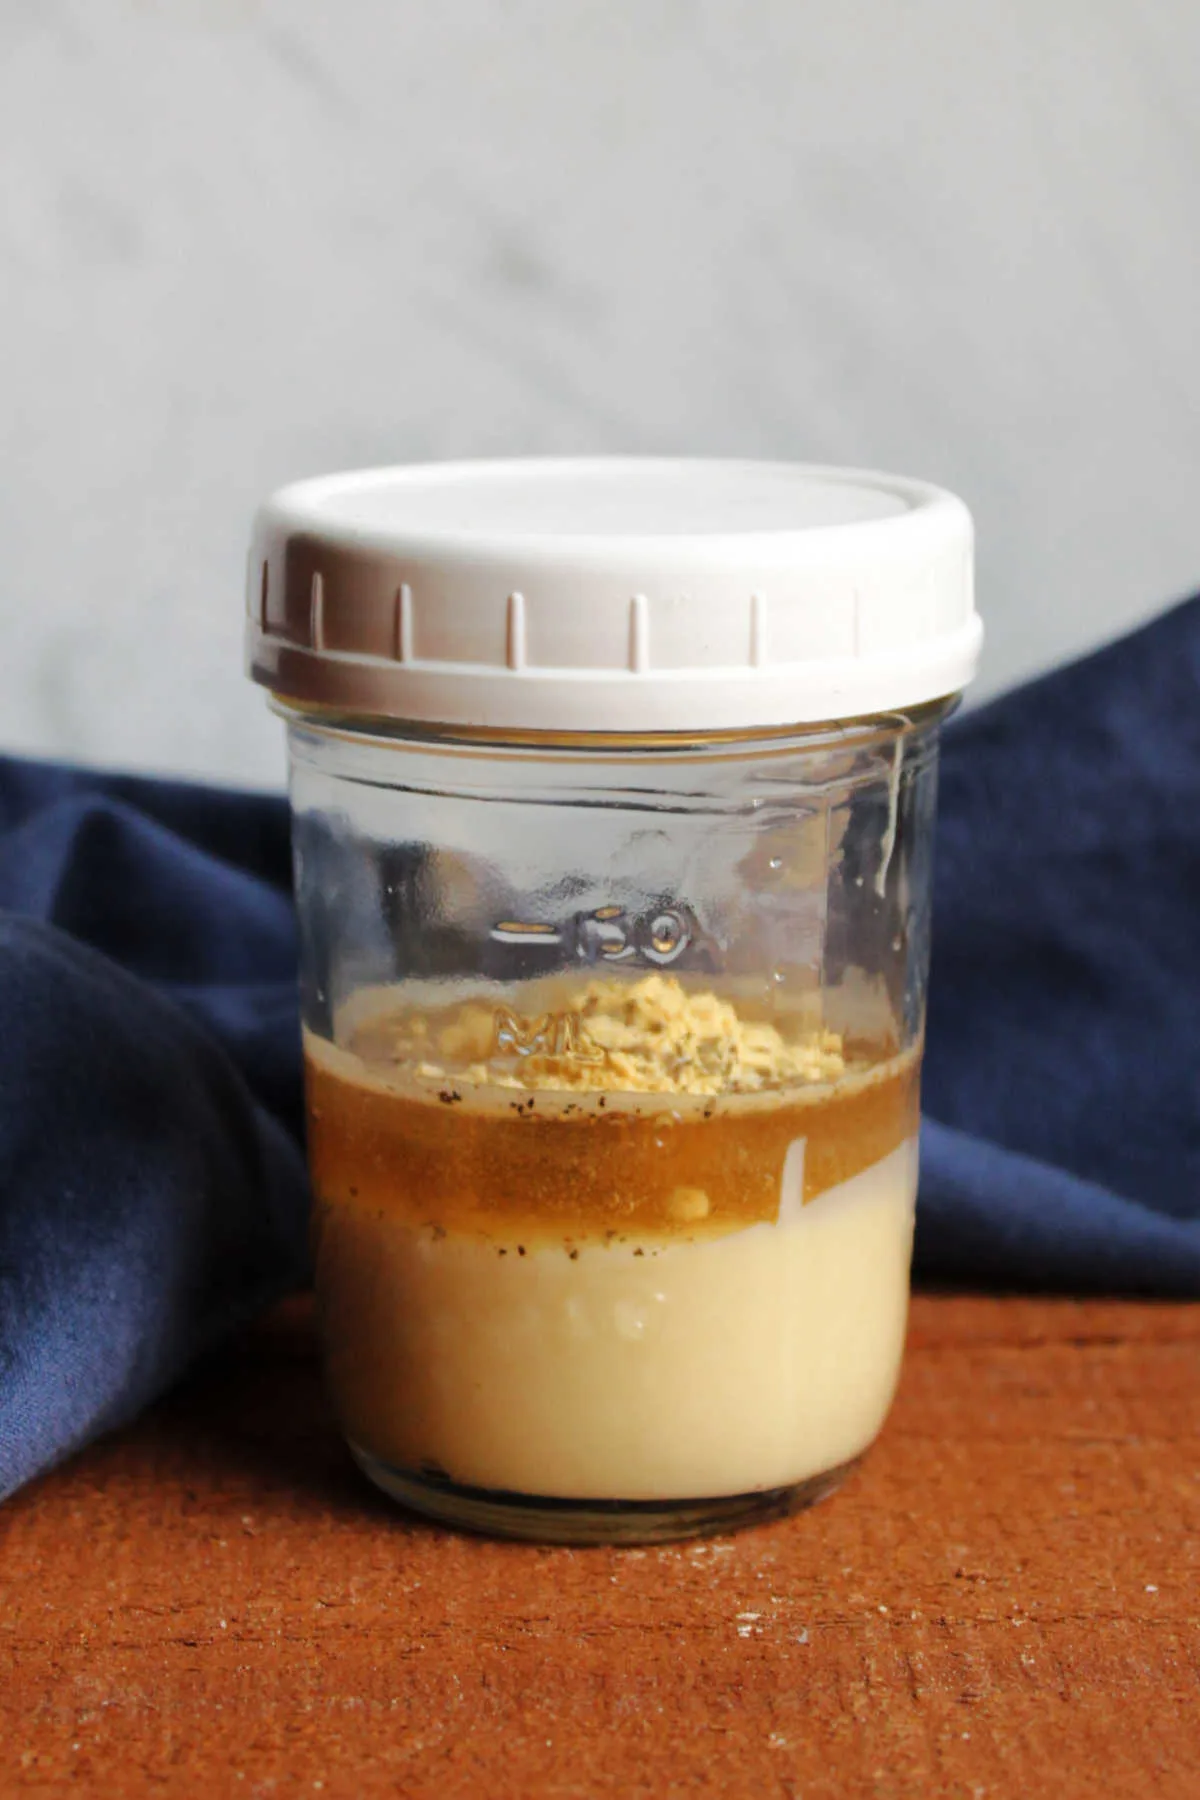 Layers of condensed milk, vinegar and seasonings in jar ready to be mixed into dressing.